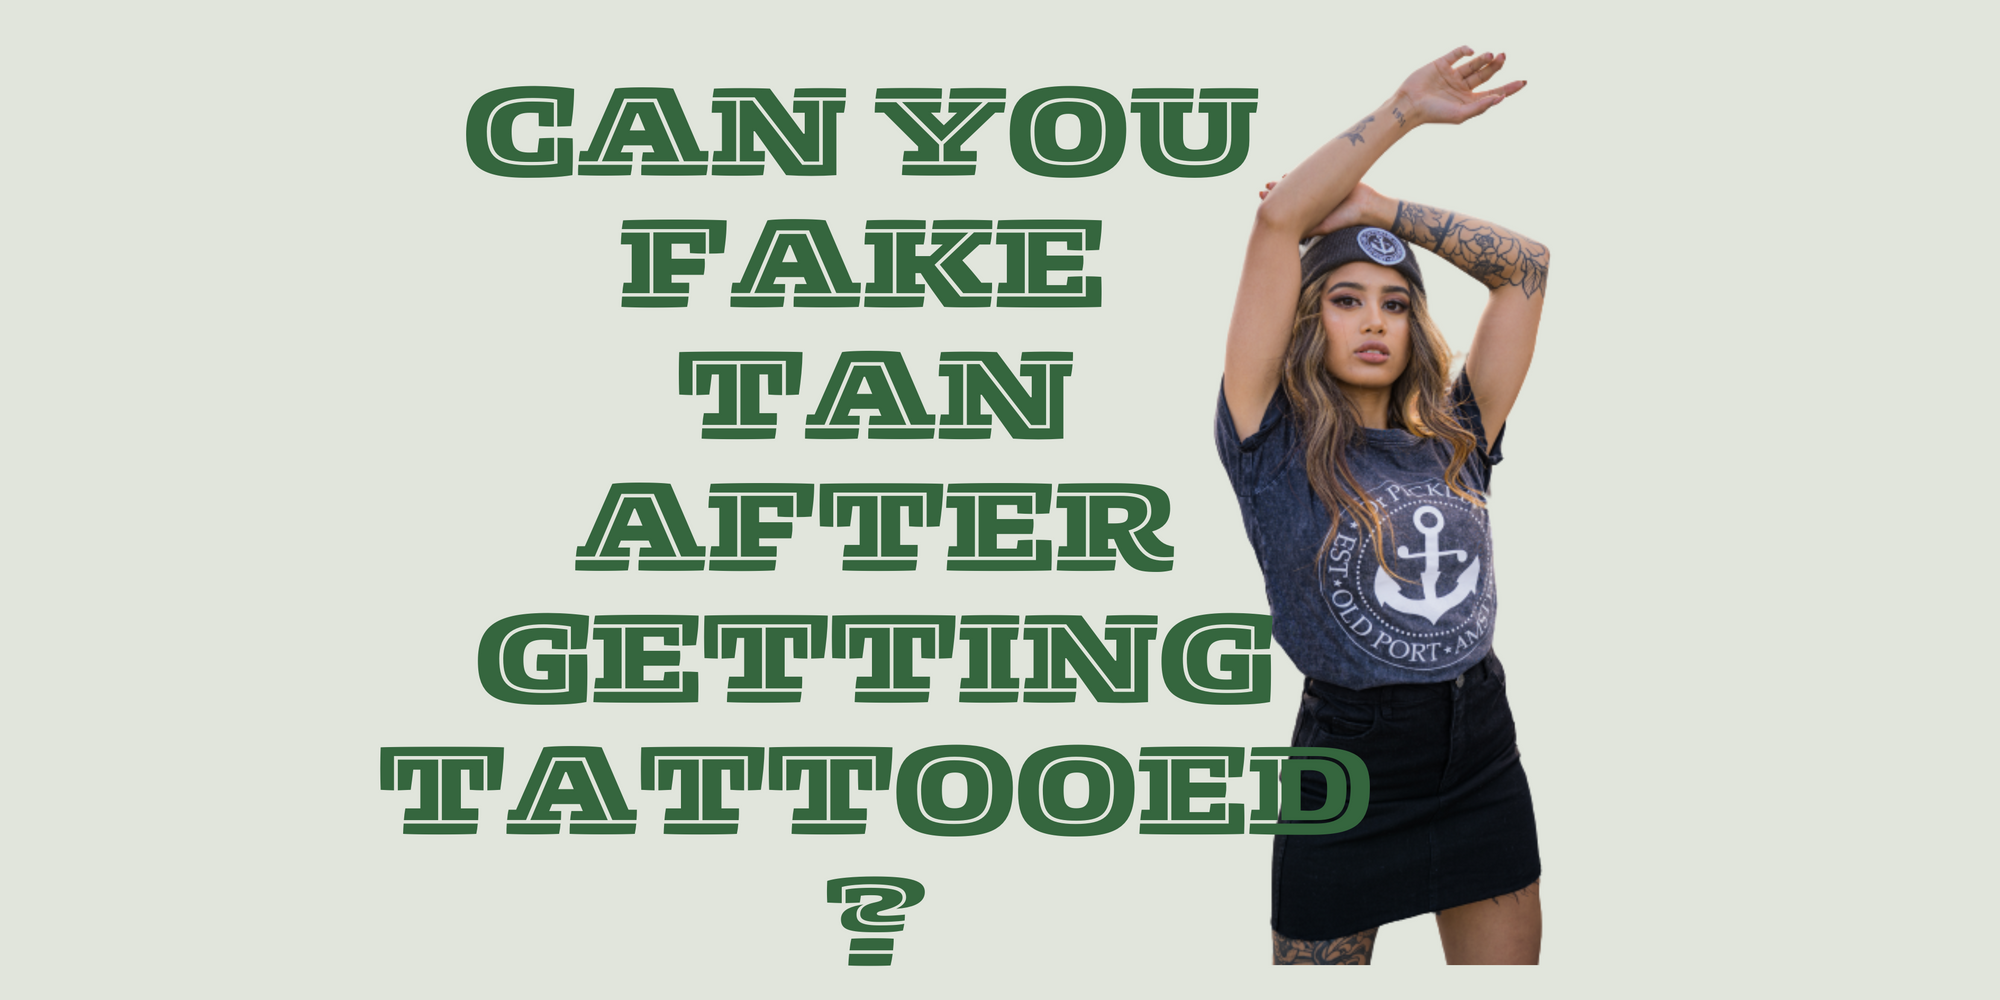 CAN YOU FAKE TAN AFTER GETTING TATTOOED?